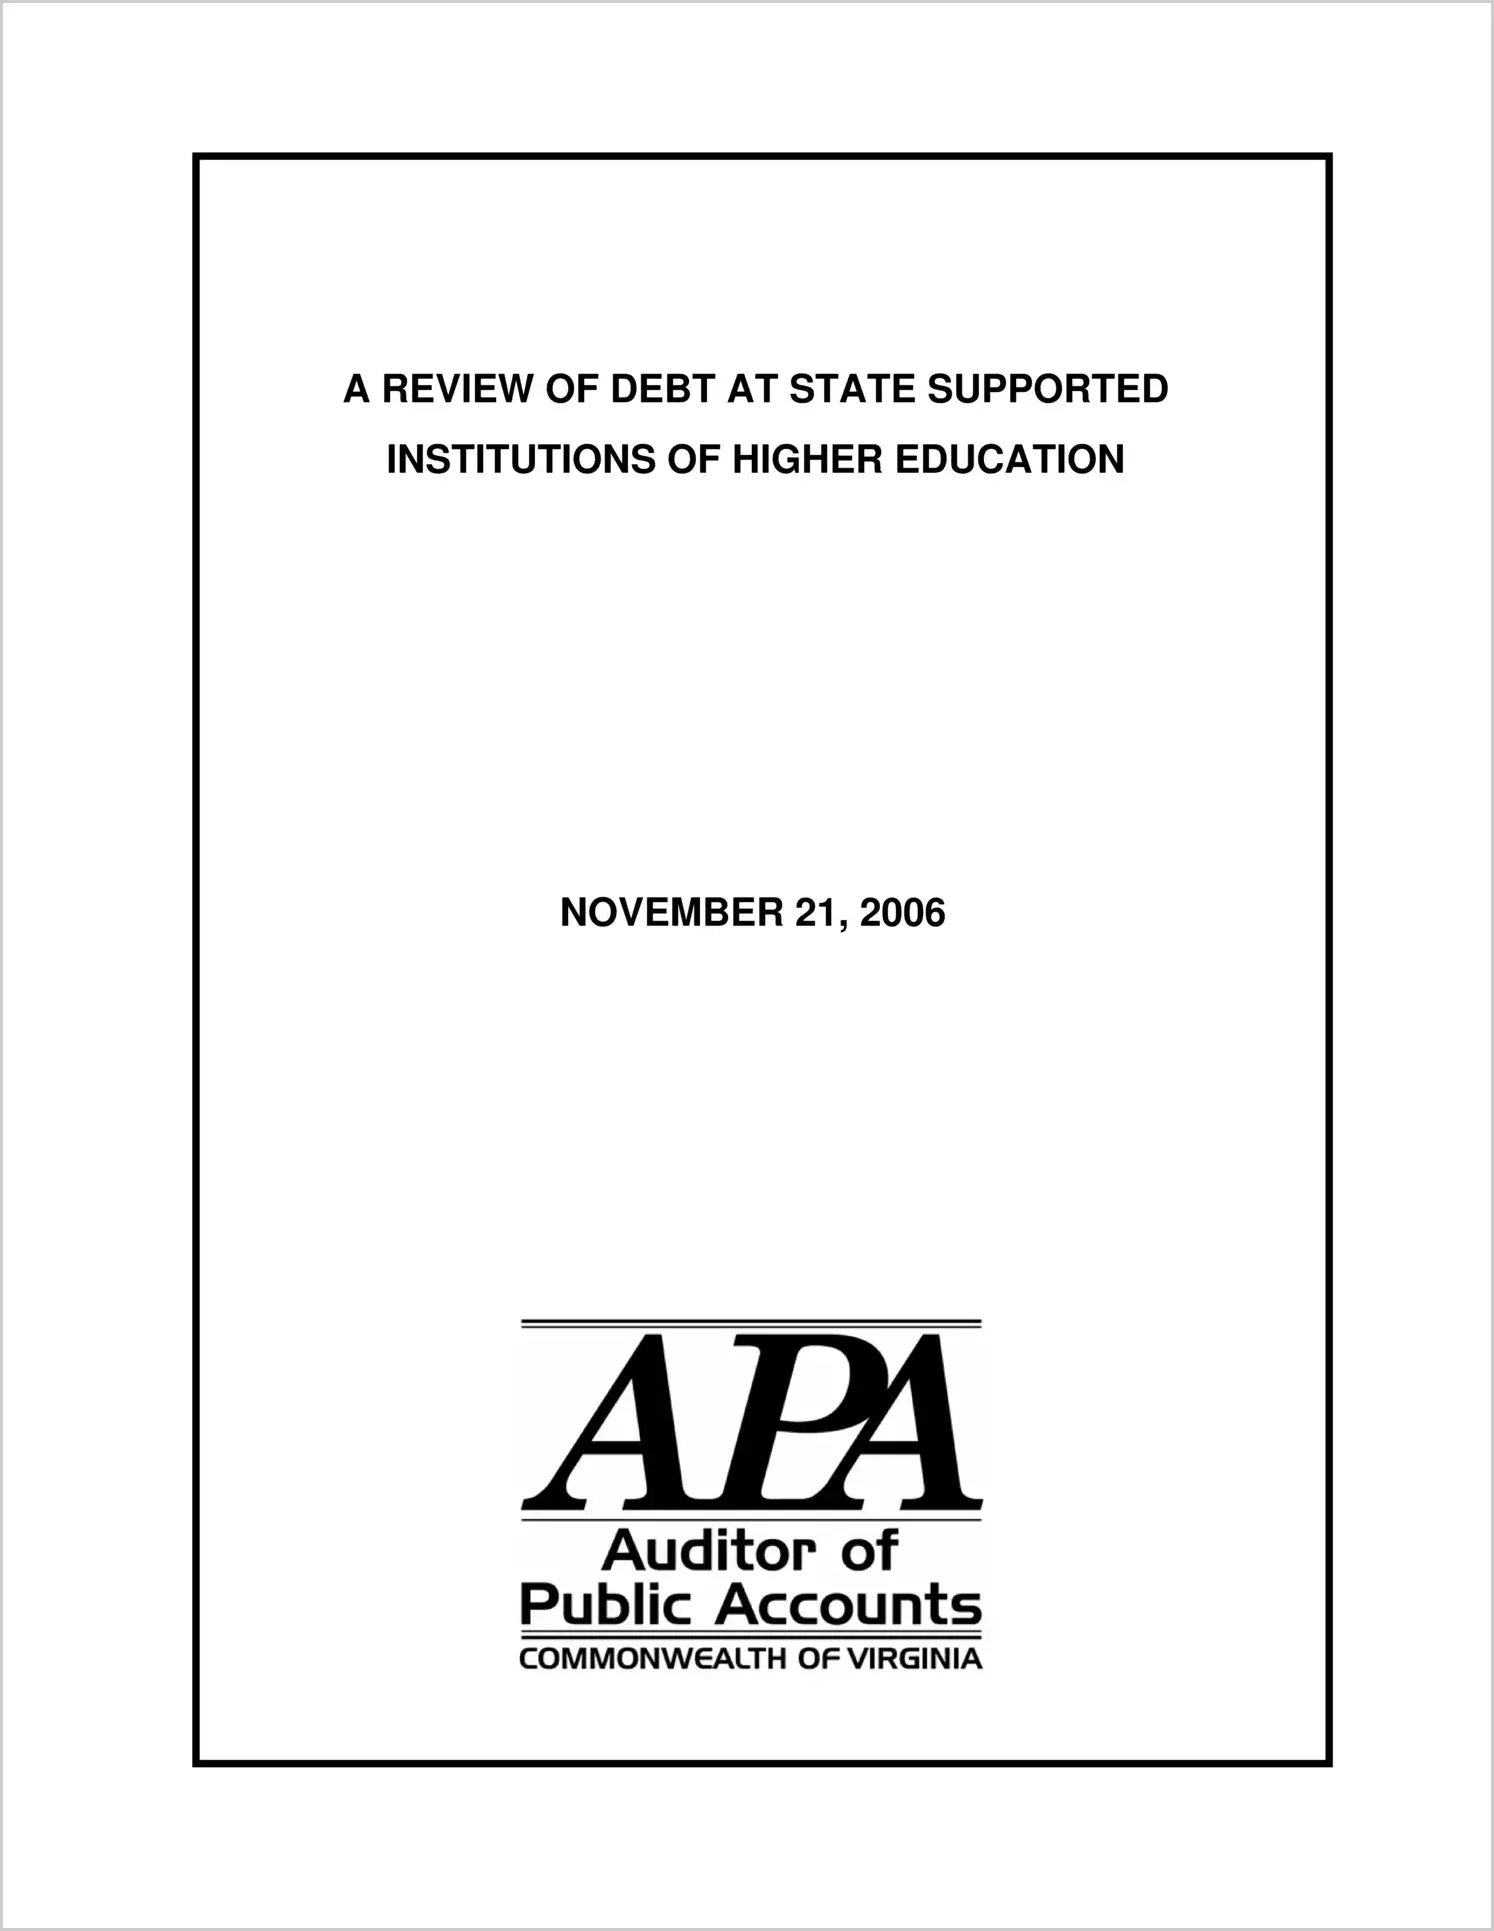 A Review of Debt at State Supported Institutions of Higher Education, November 21, 2006